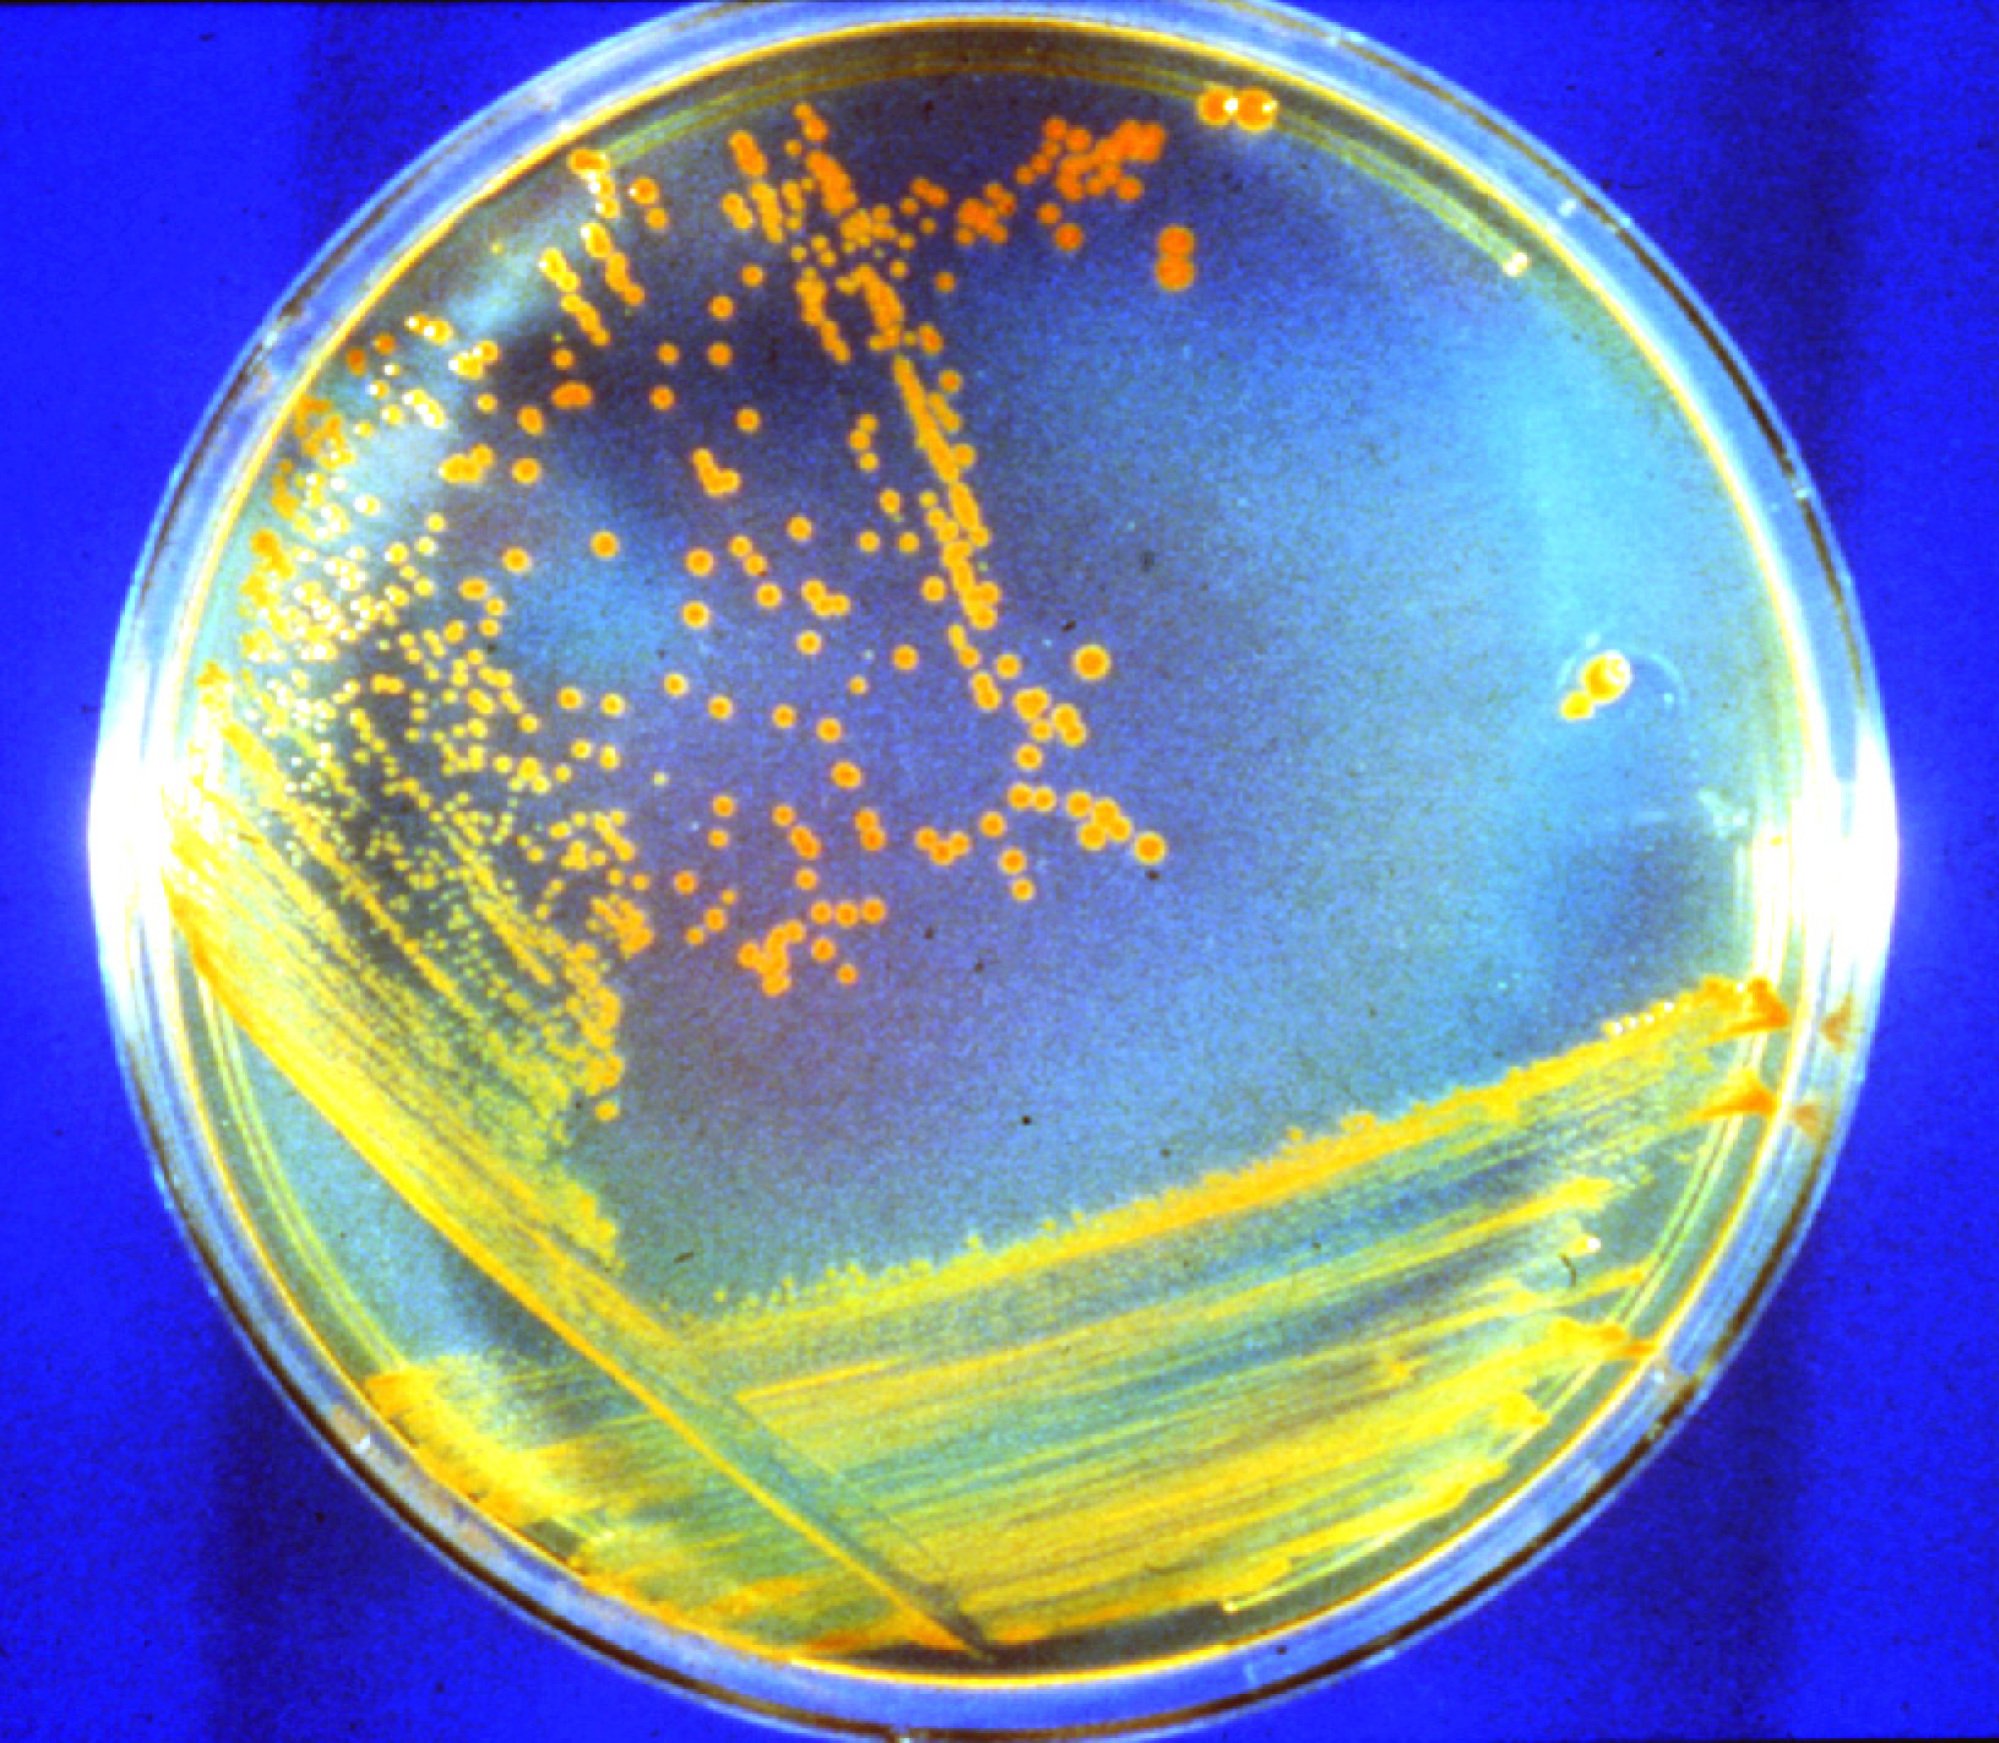 the microbe D. radiodurans growing on a plate.